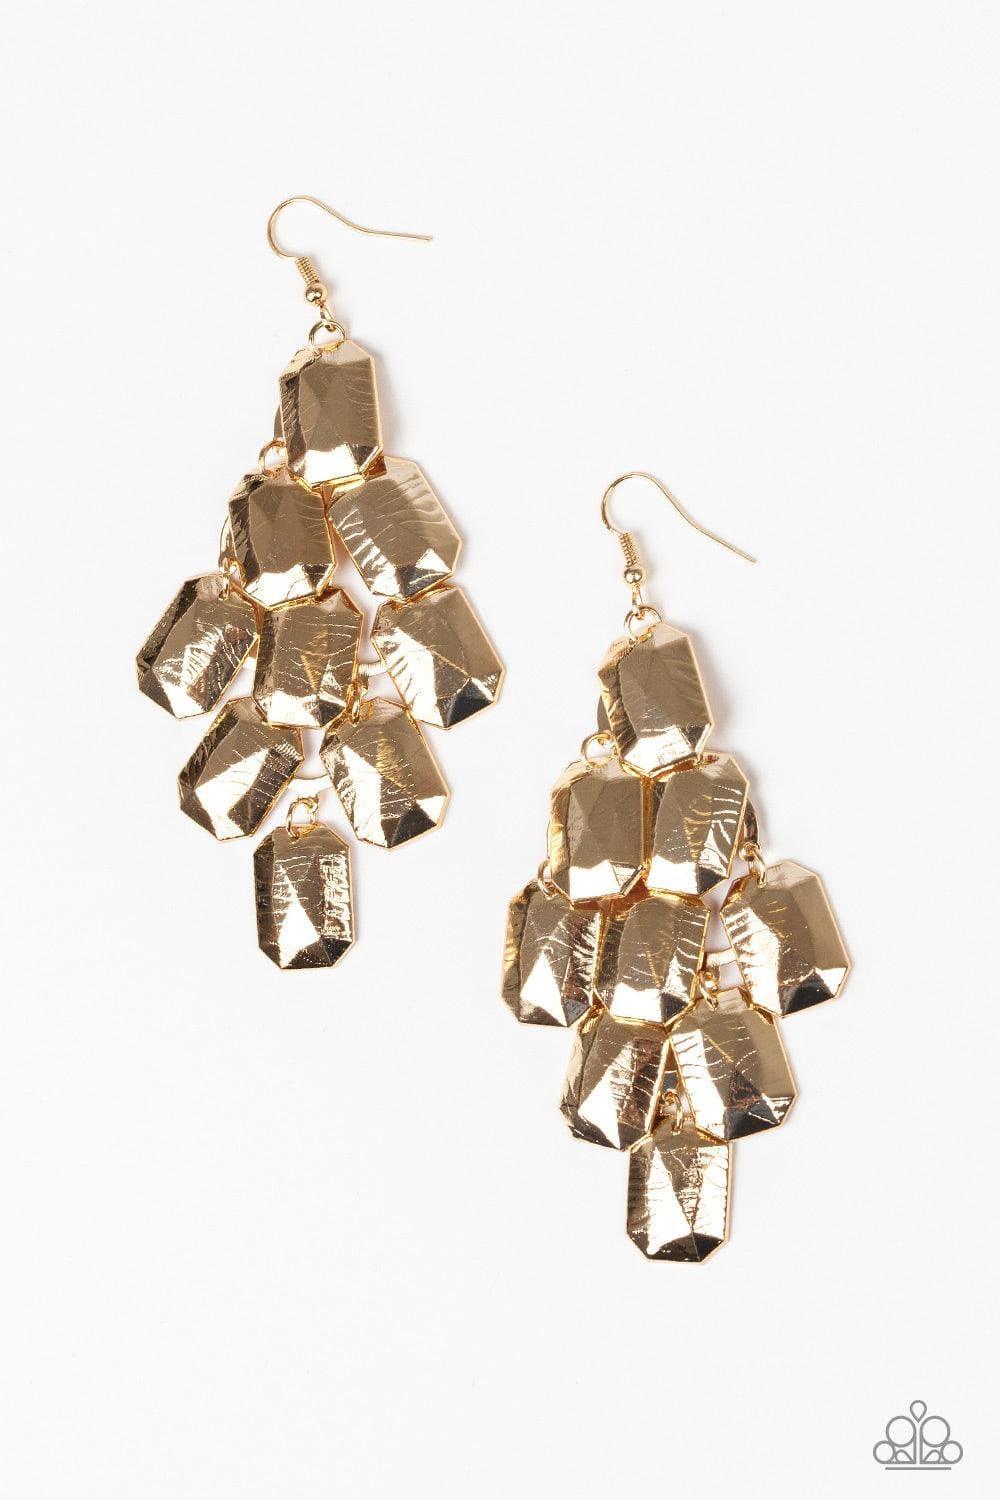 Paparazzi Accessories - Contemporary Catwalk - Gold Earrings - Bling by JessieK